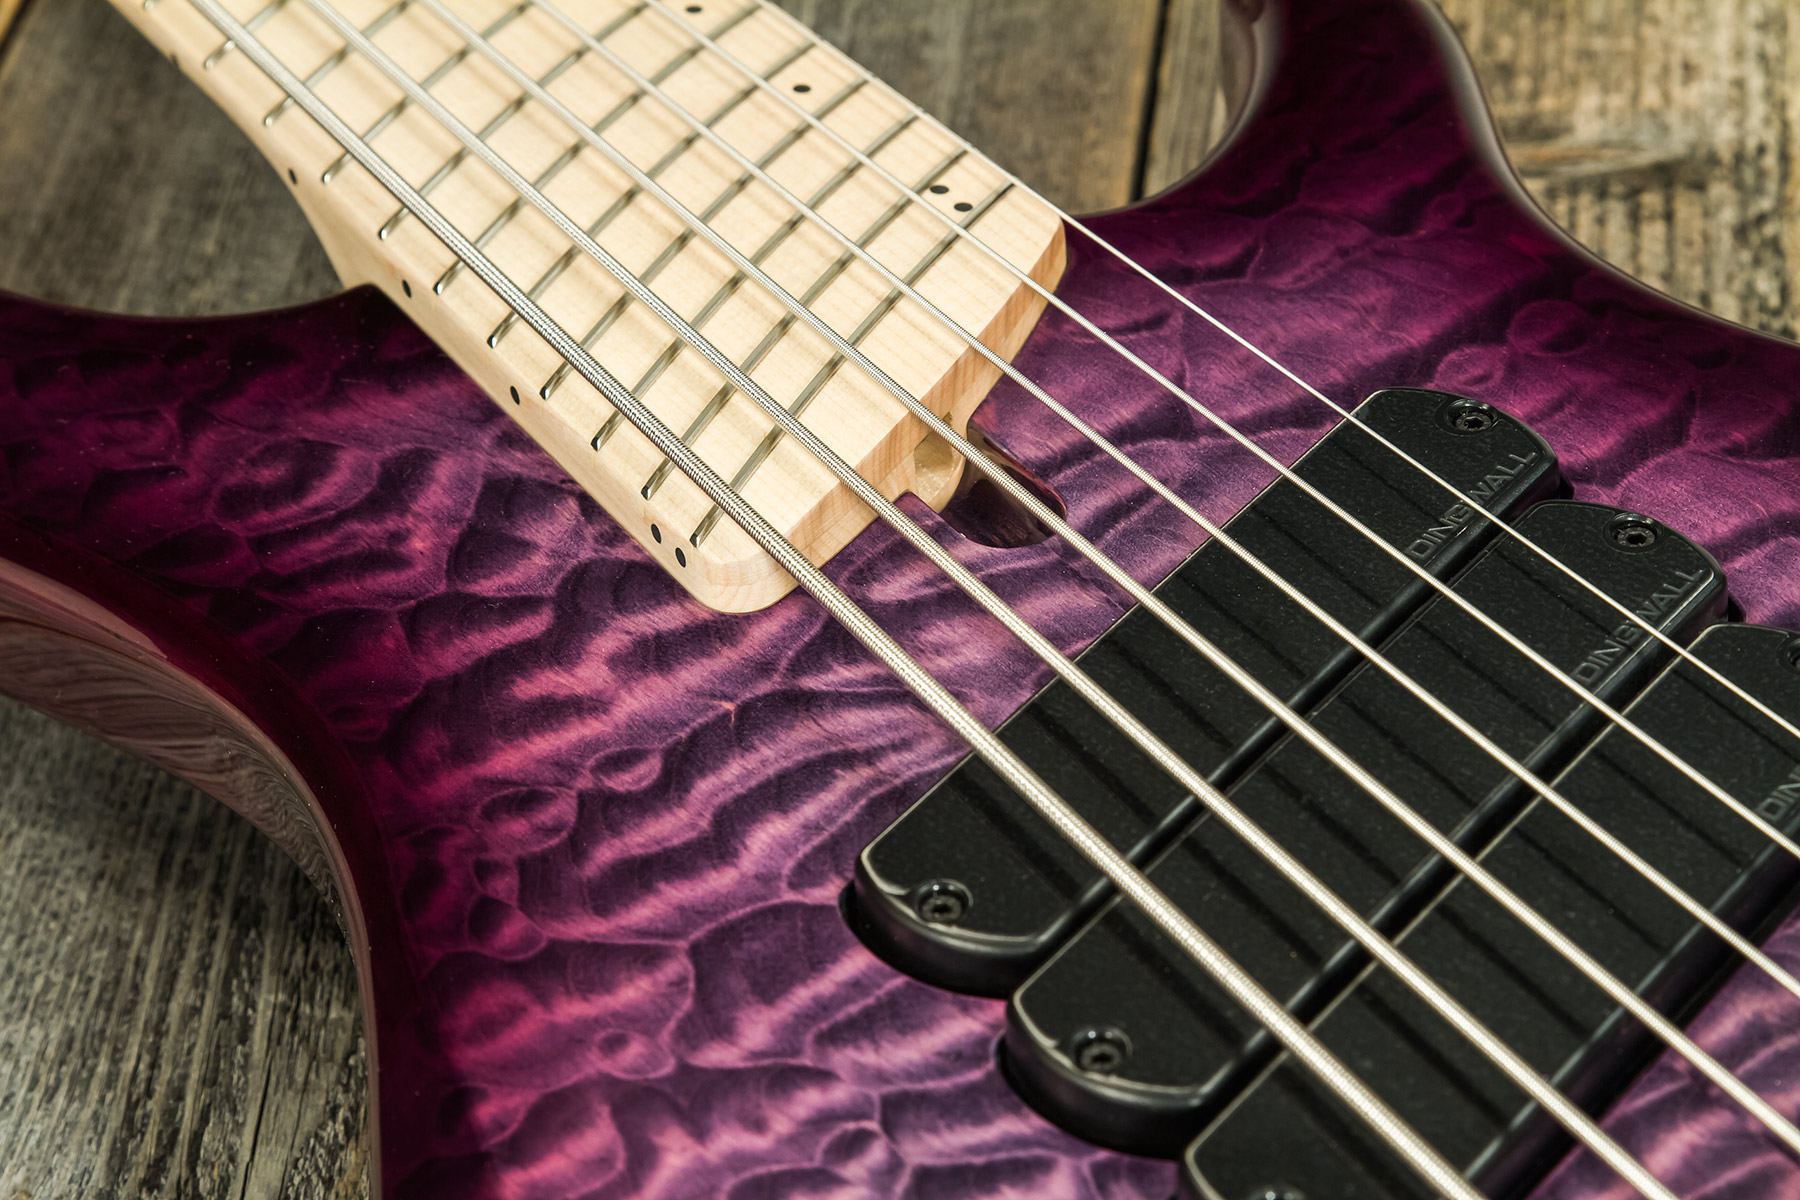 Dingwall Combustion Cb3 6c 3pu Active Mn - Ultraviolet - Solid body electric bass - Variation 2